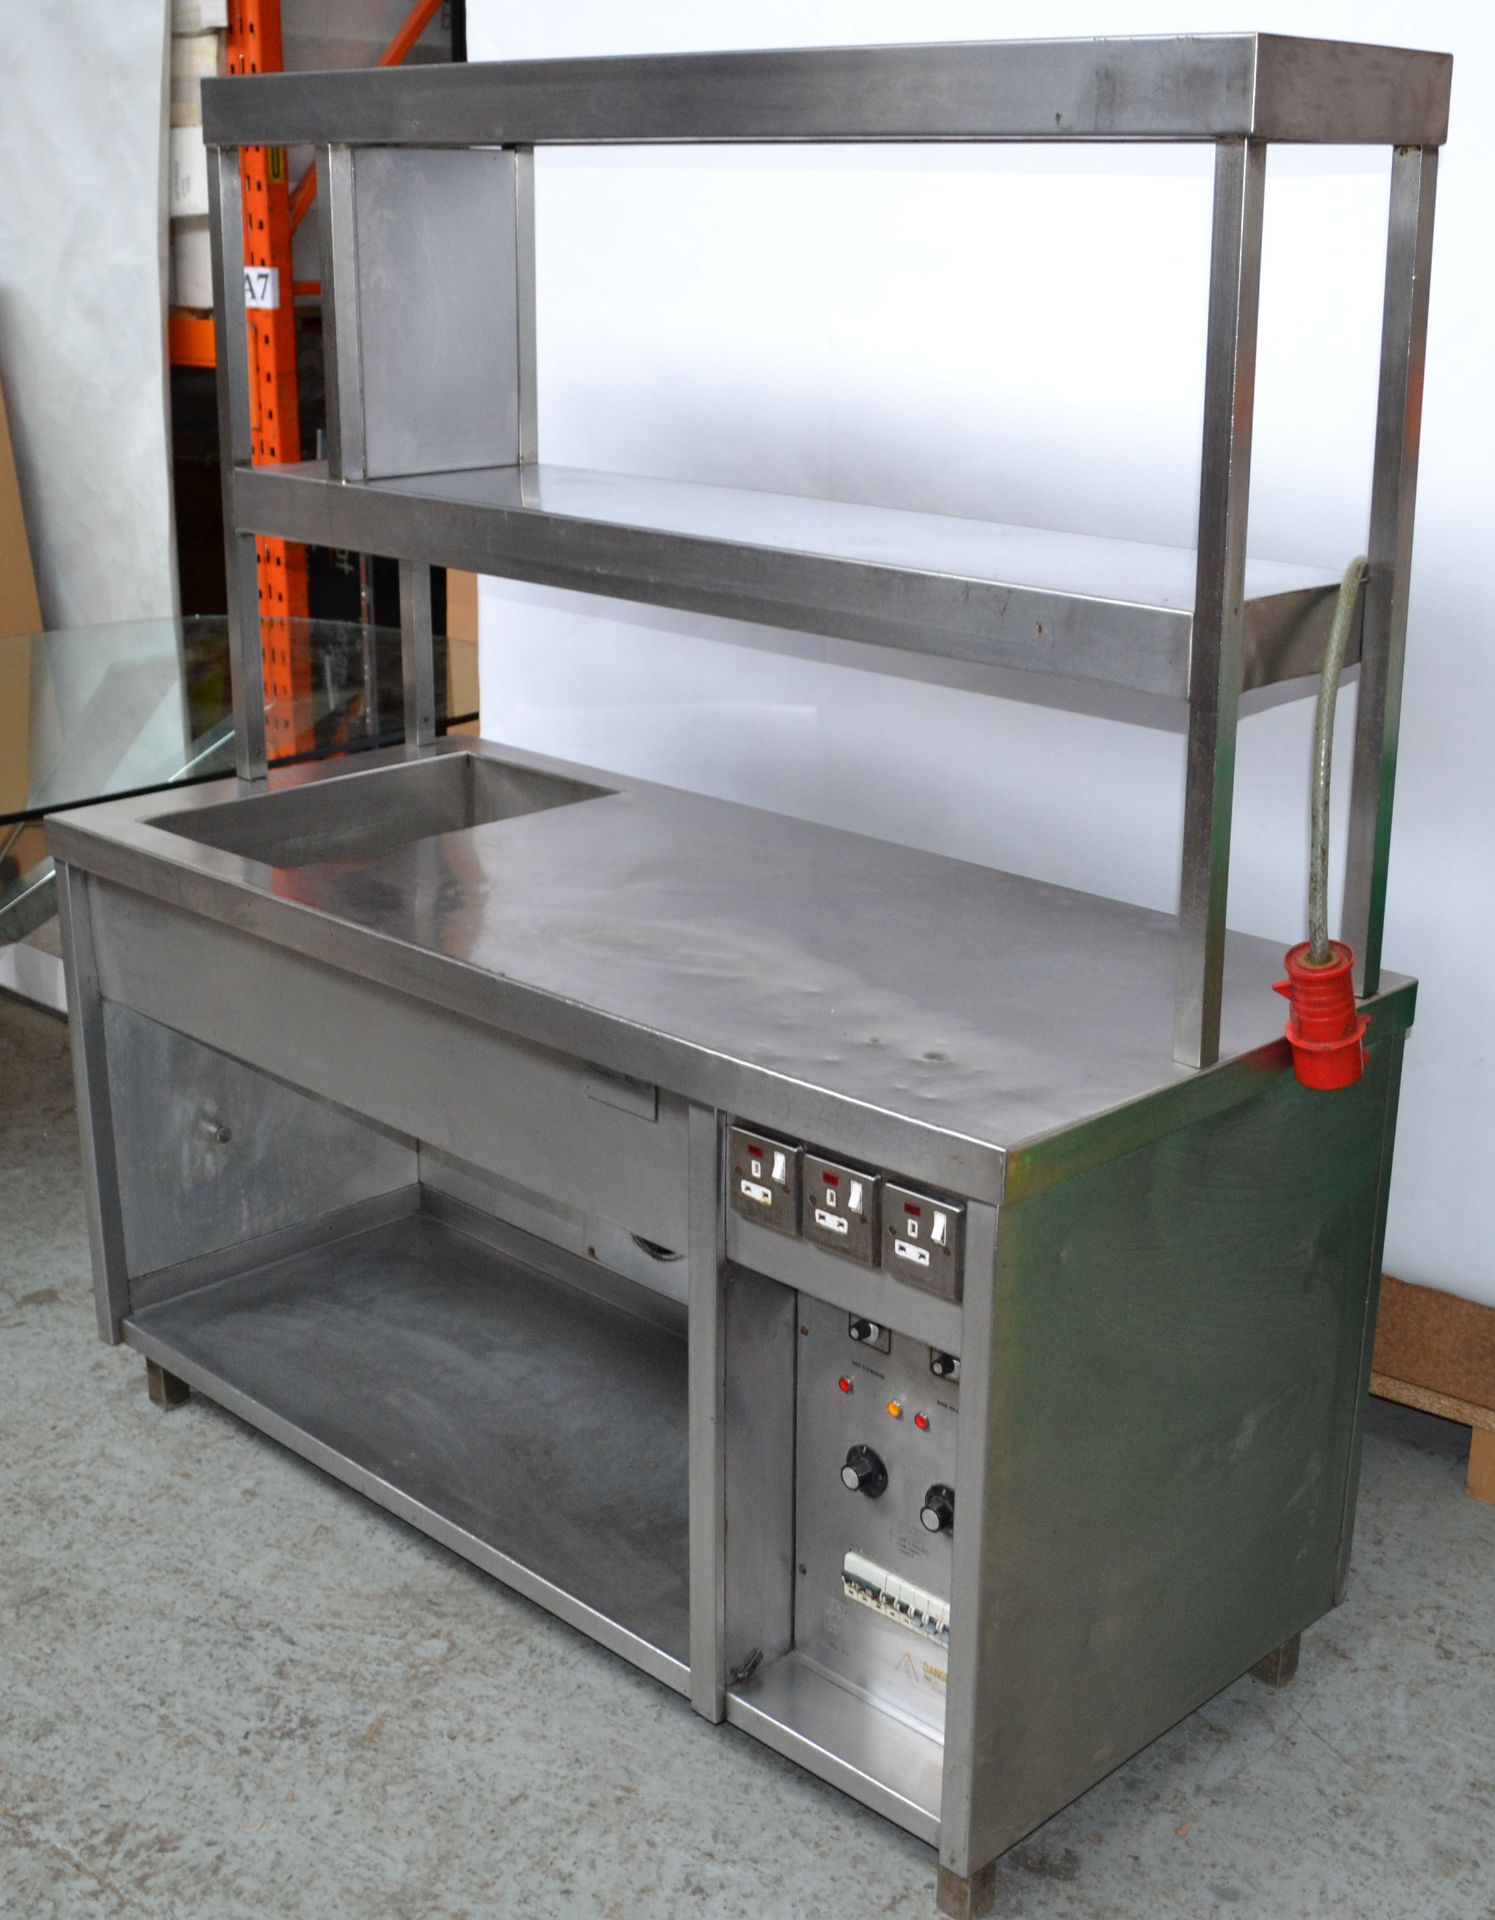 1 x EMH Fabrications Stainless Steel Hot Cupboard - Ref NCE005 - CL007 - Location: Altrincham WA14 - Image 3 of 14